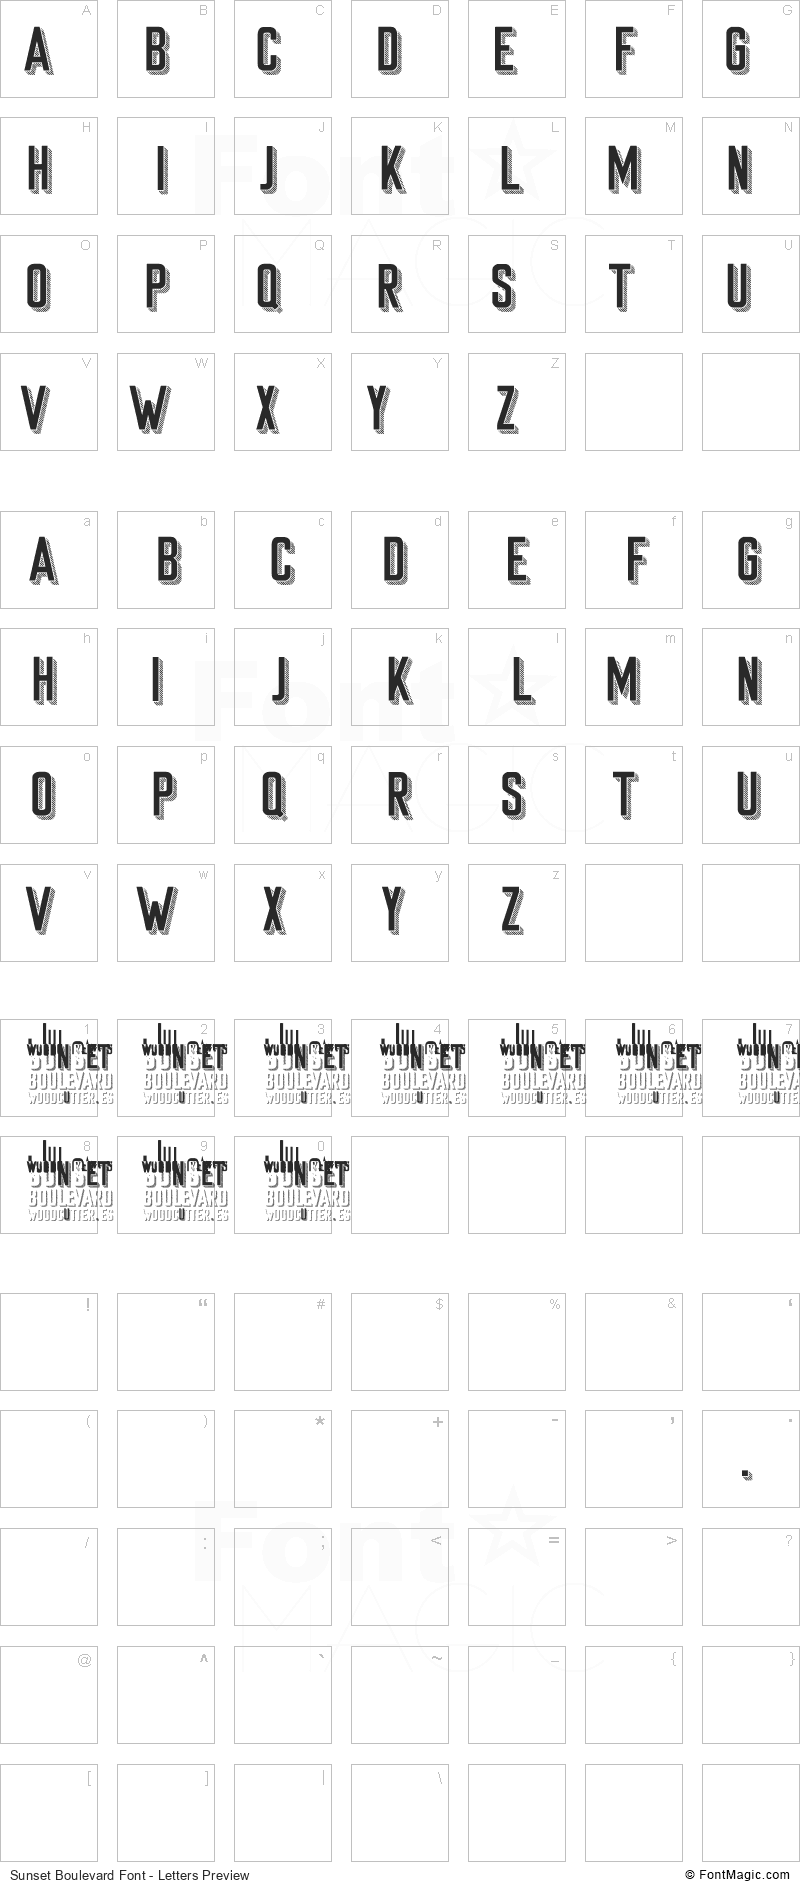 Sunset Boulevard Font - All Latters Preview Chart